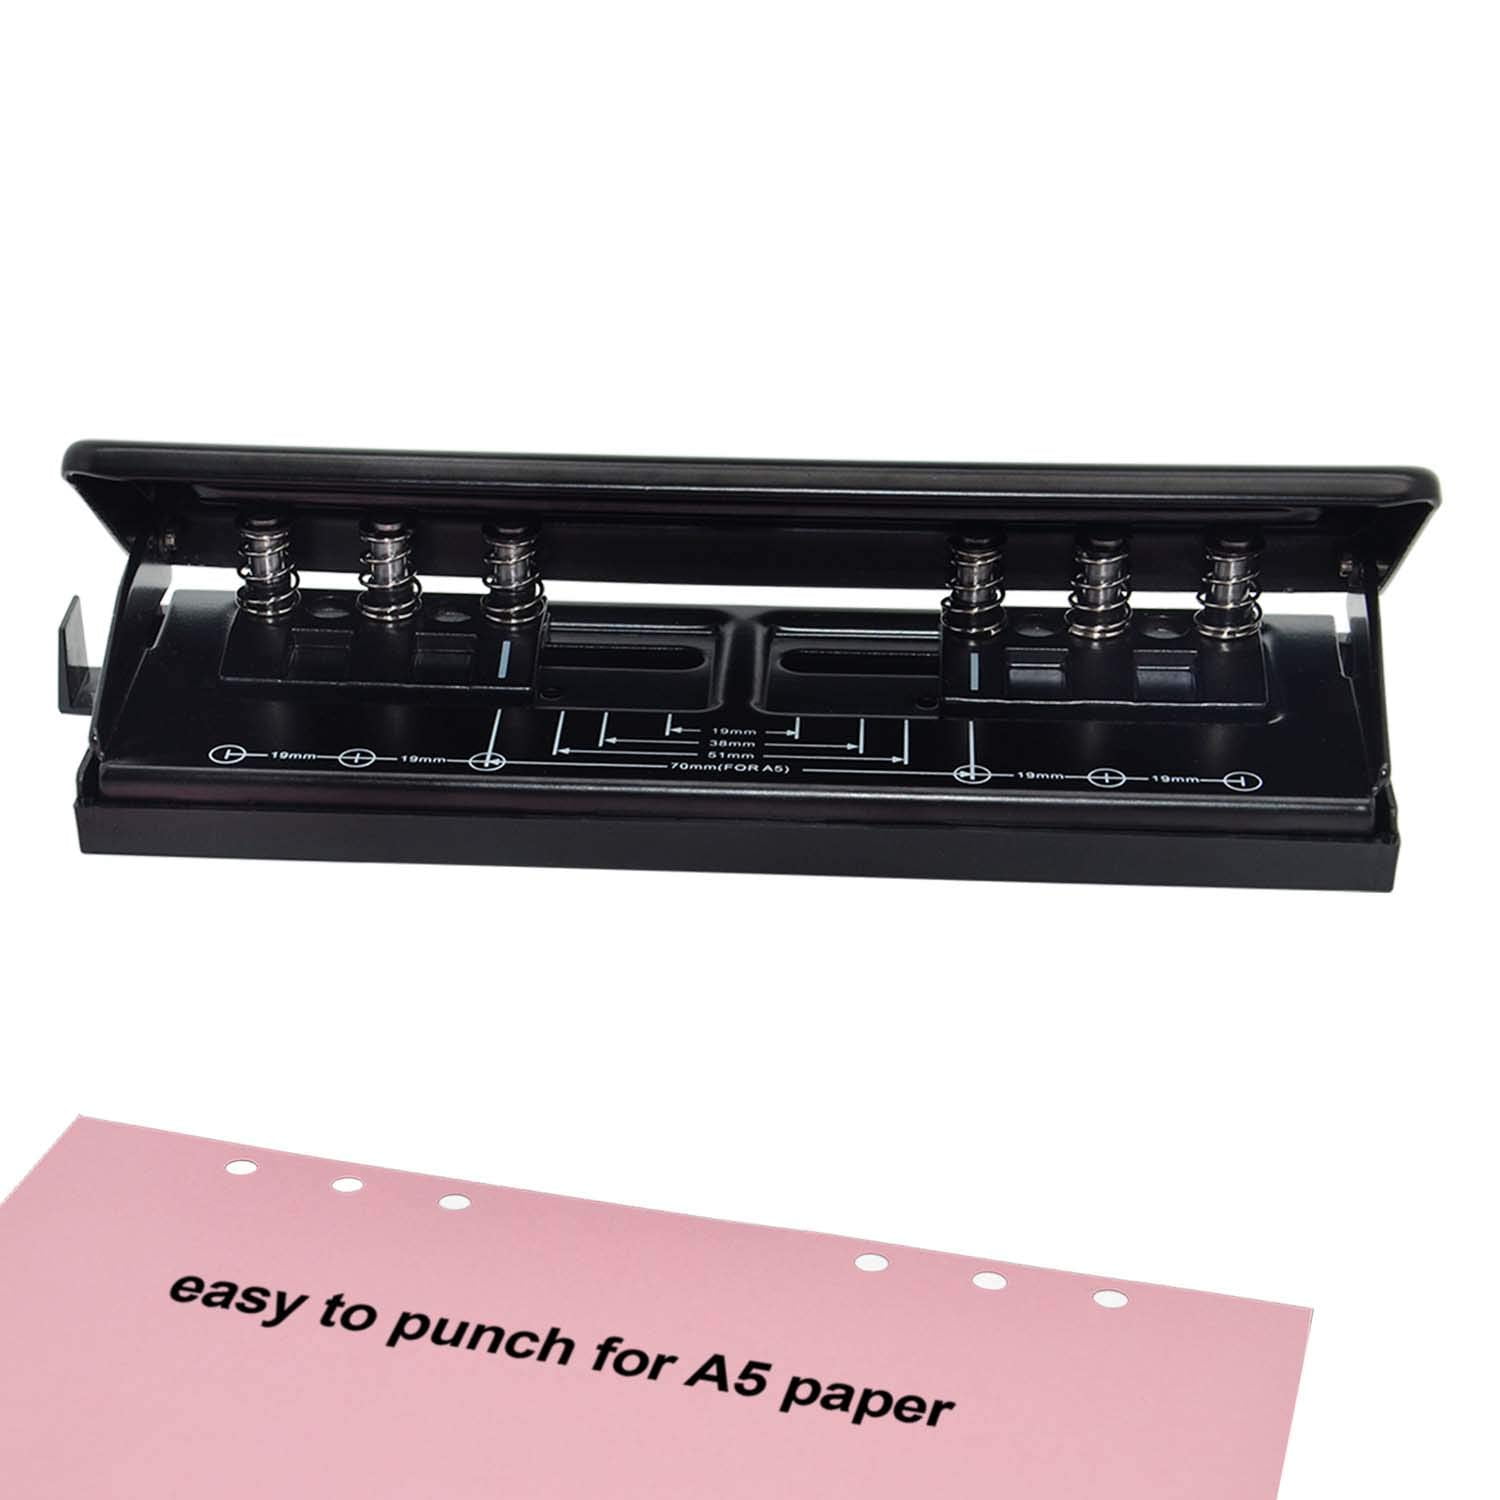 What is the Best 6-Hole Punch for Louis Vuitton Agenda GM (A5